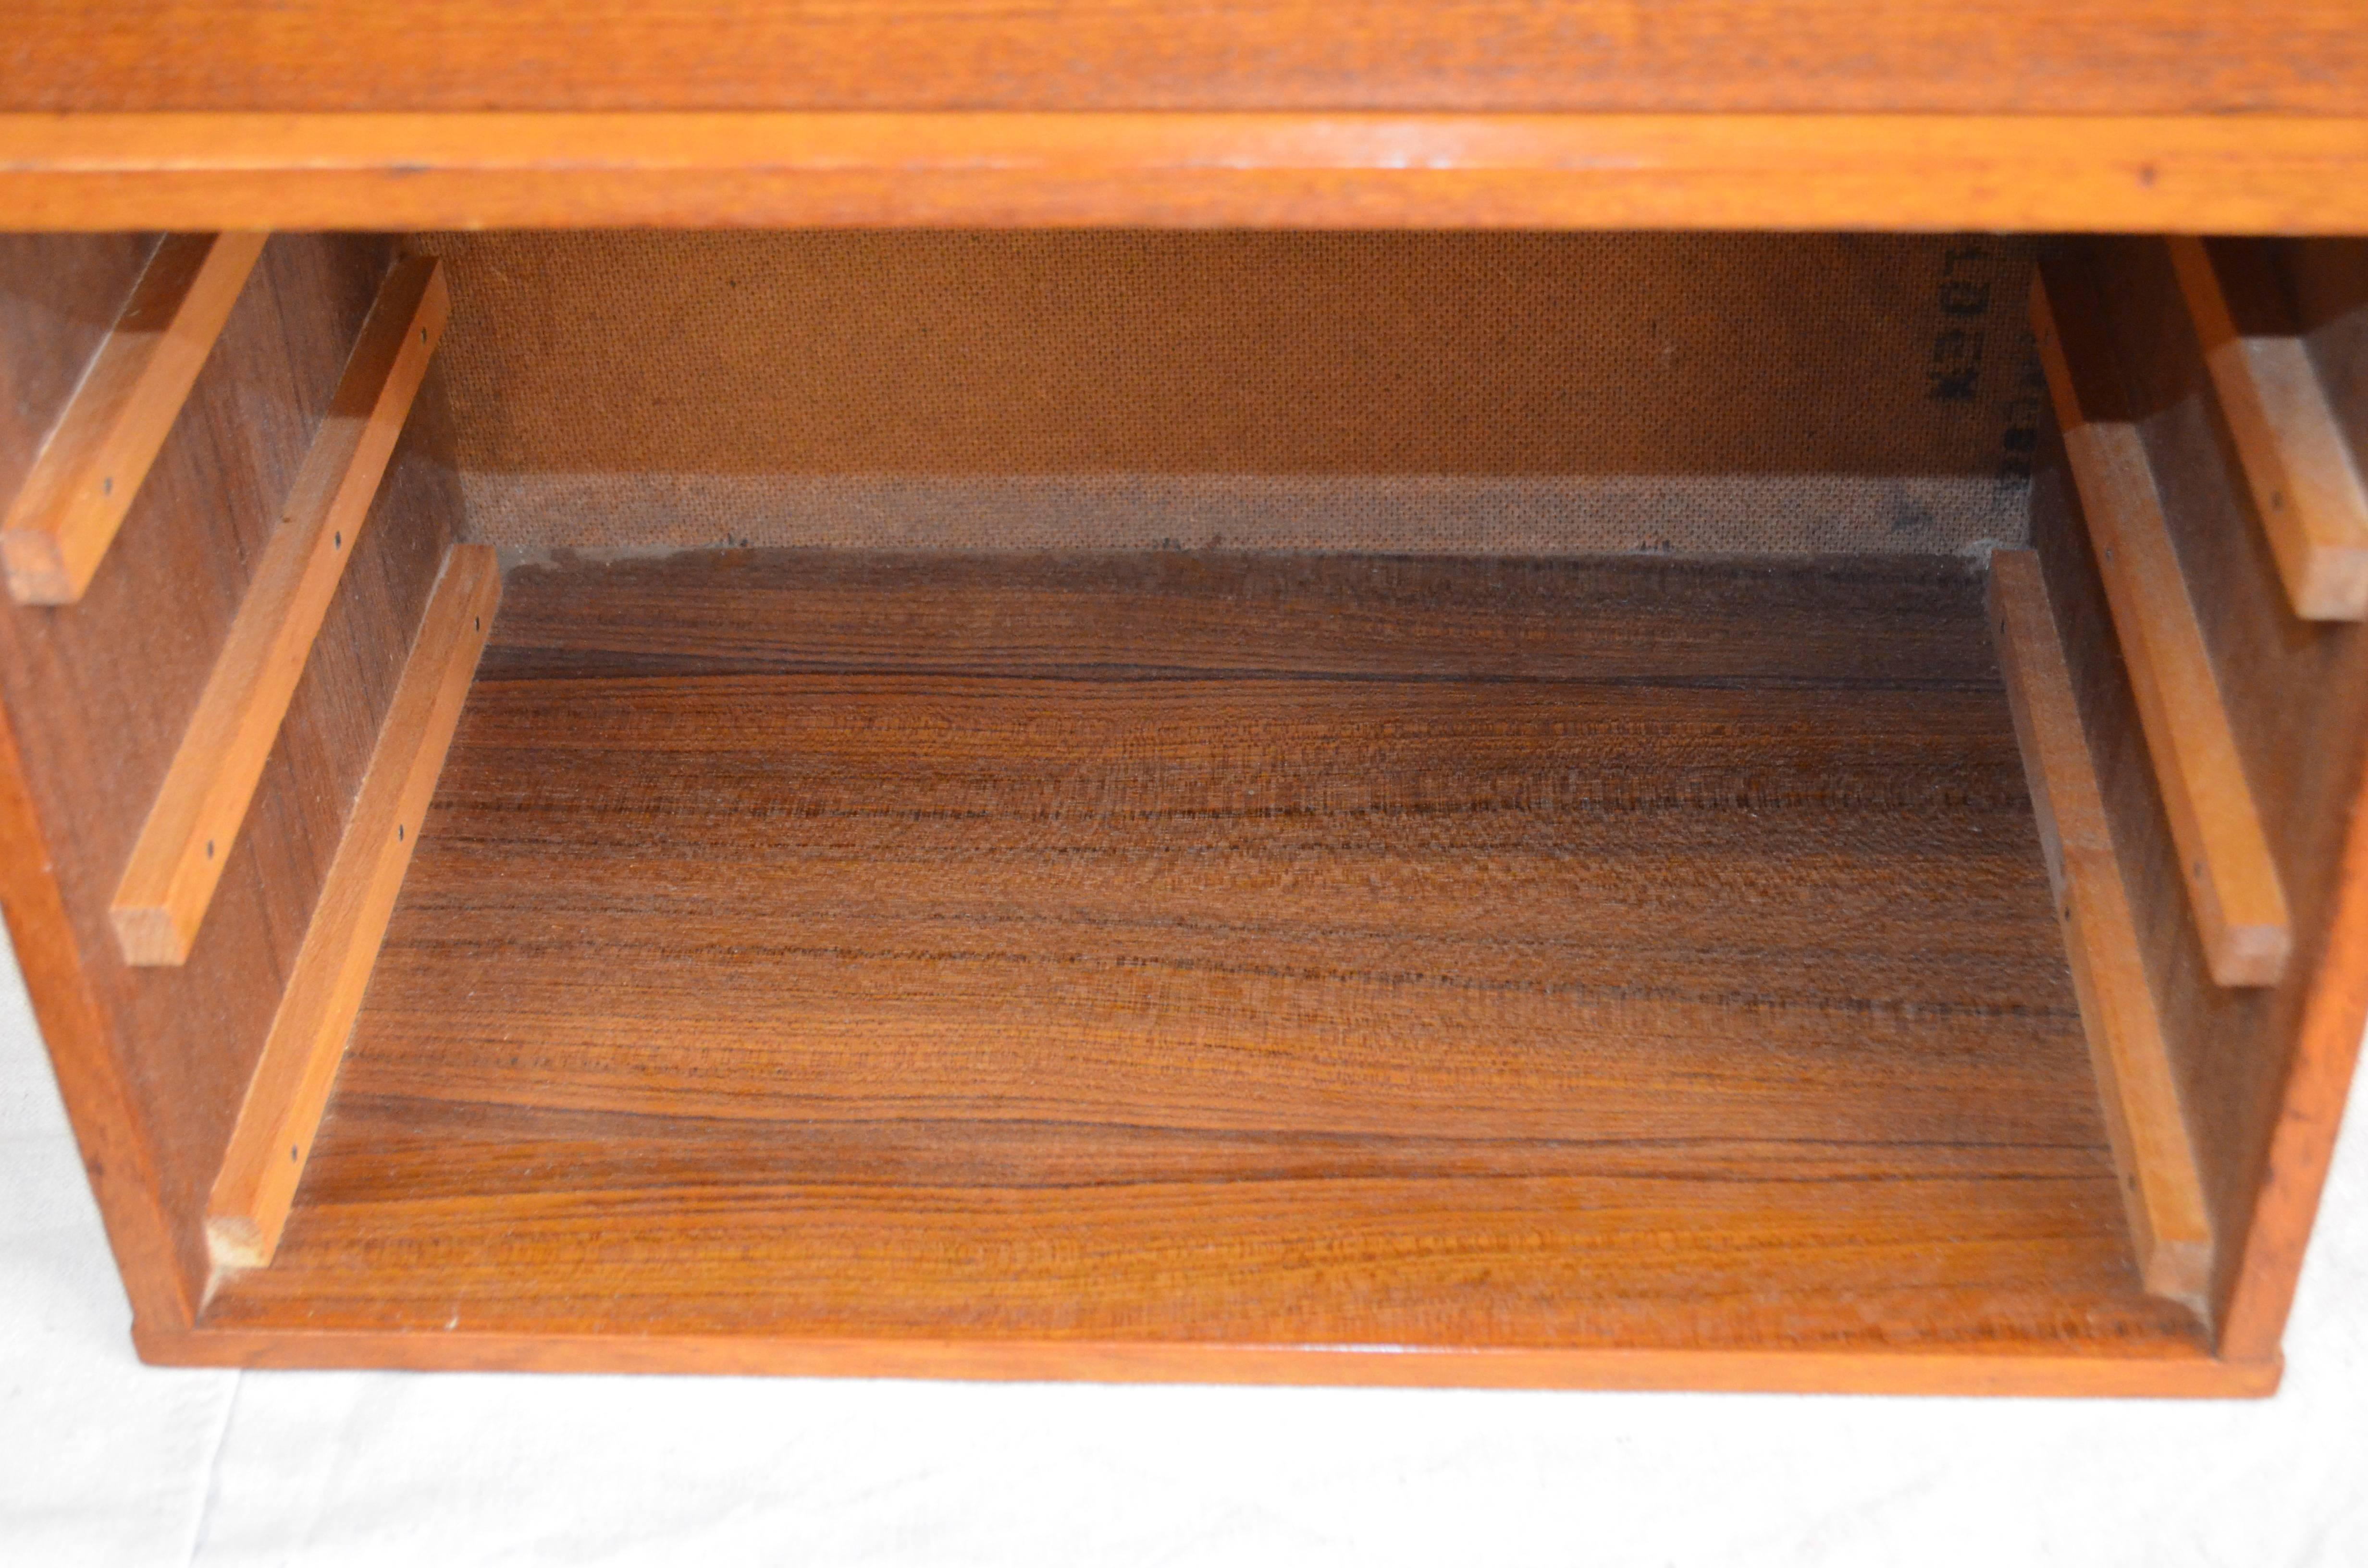 20th Century Jewelry/Letter Box of Teak Designed by Arne Vodder, Made in Sweden